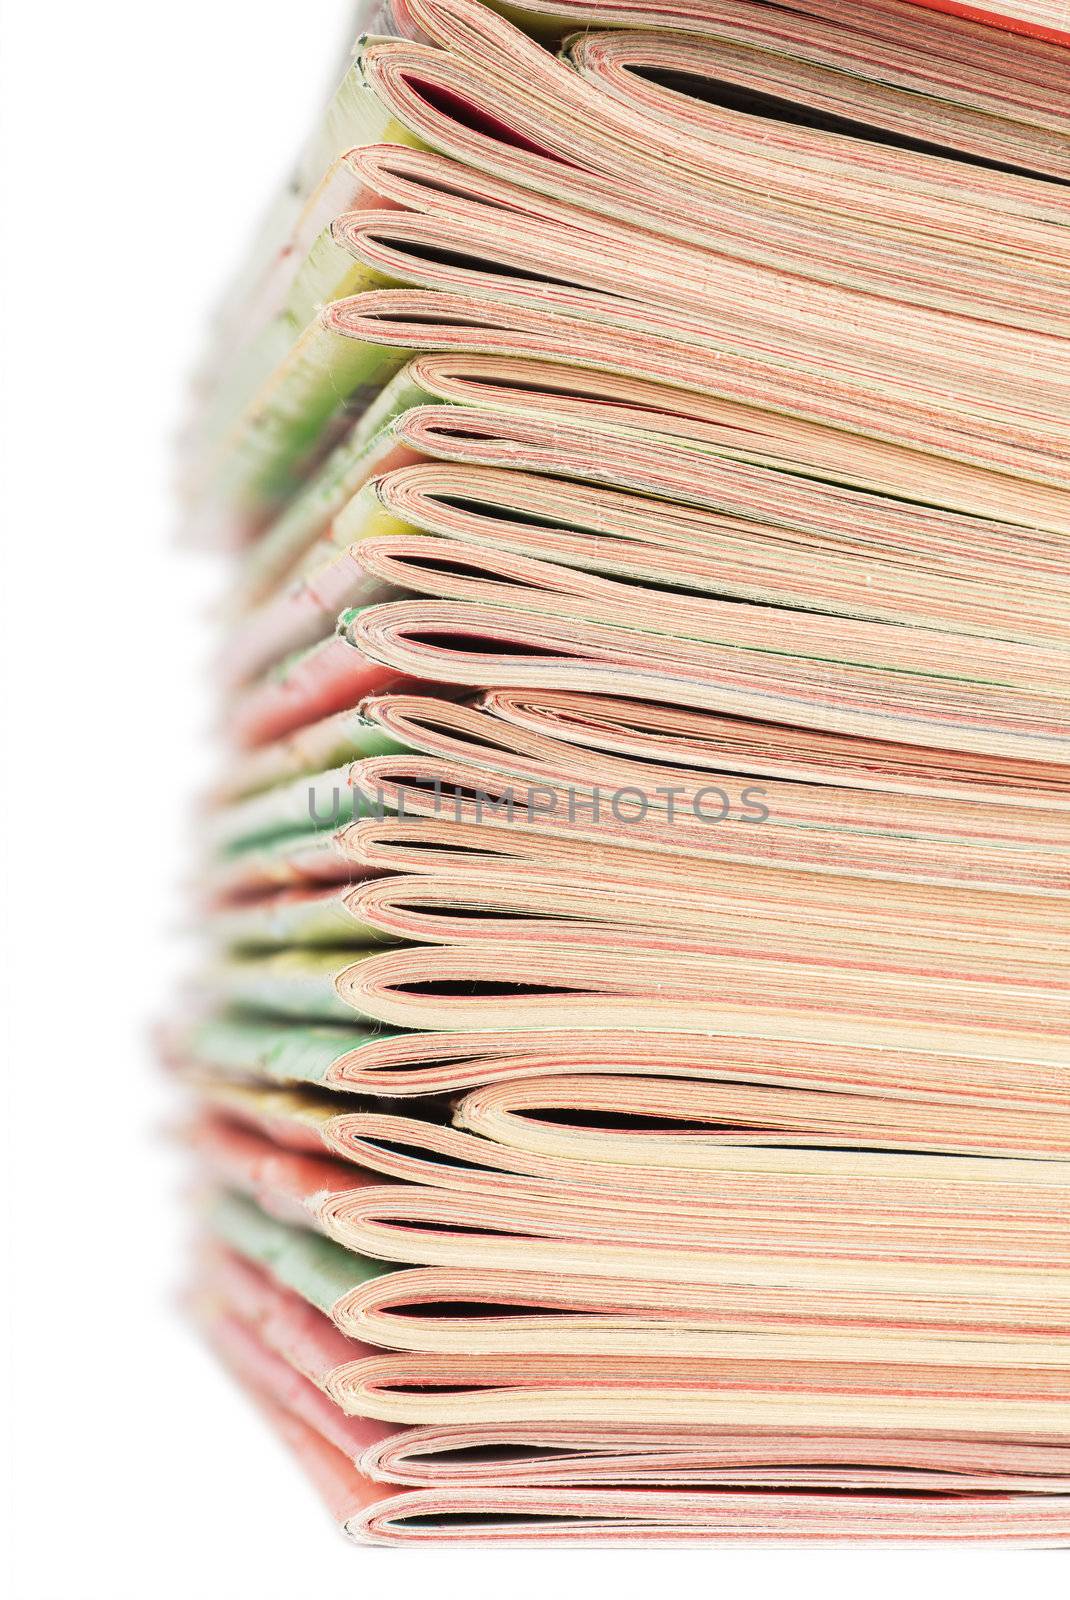 Closeup view of stack of magazines